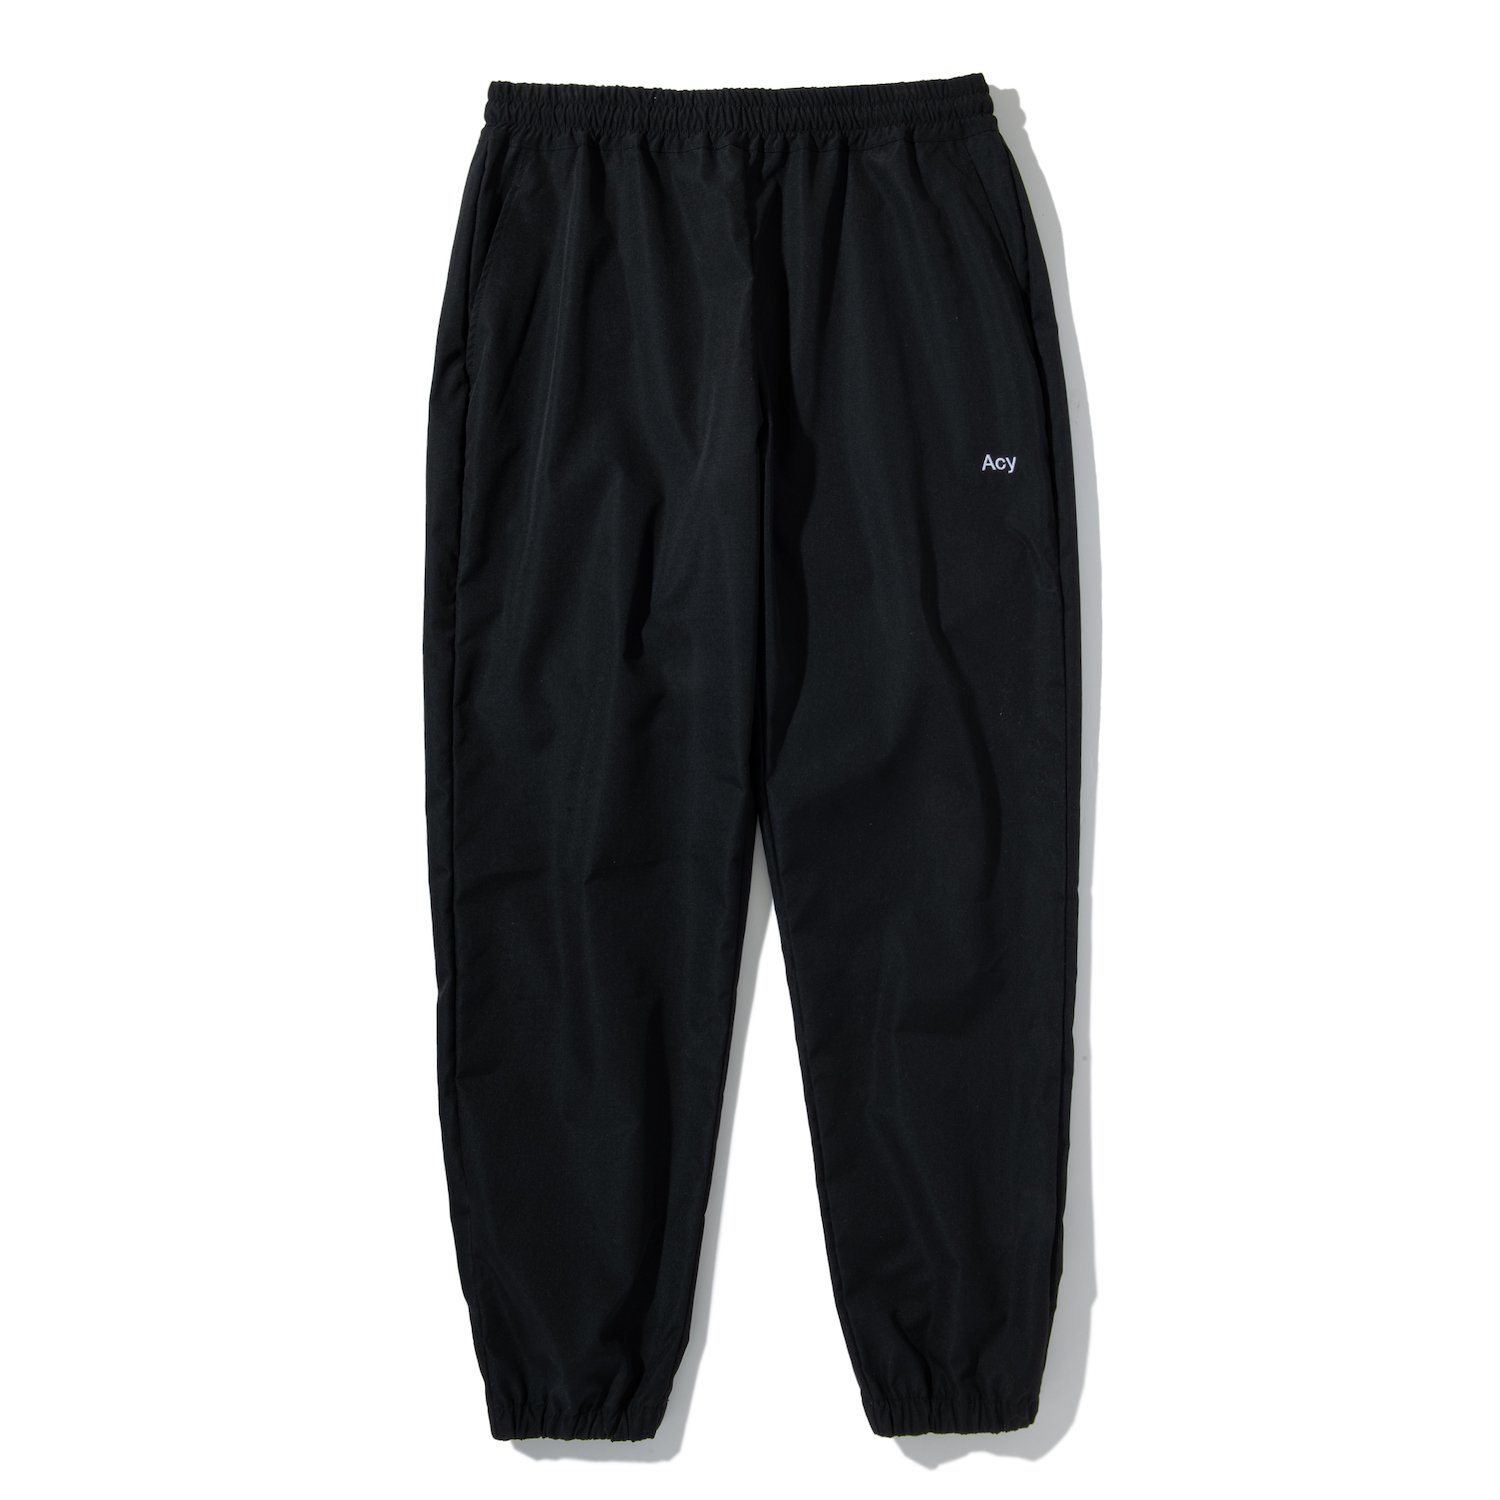 Acy<br>TRACK PANTS<br>